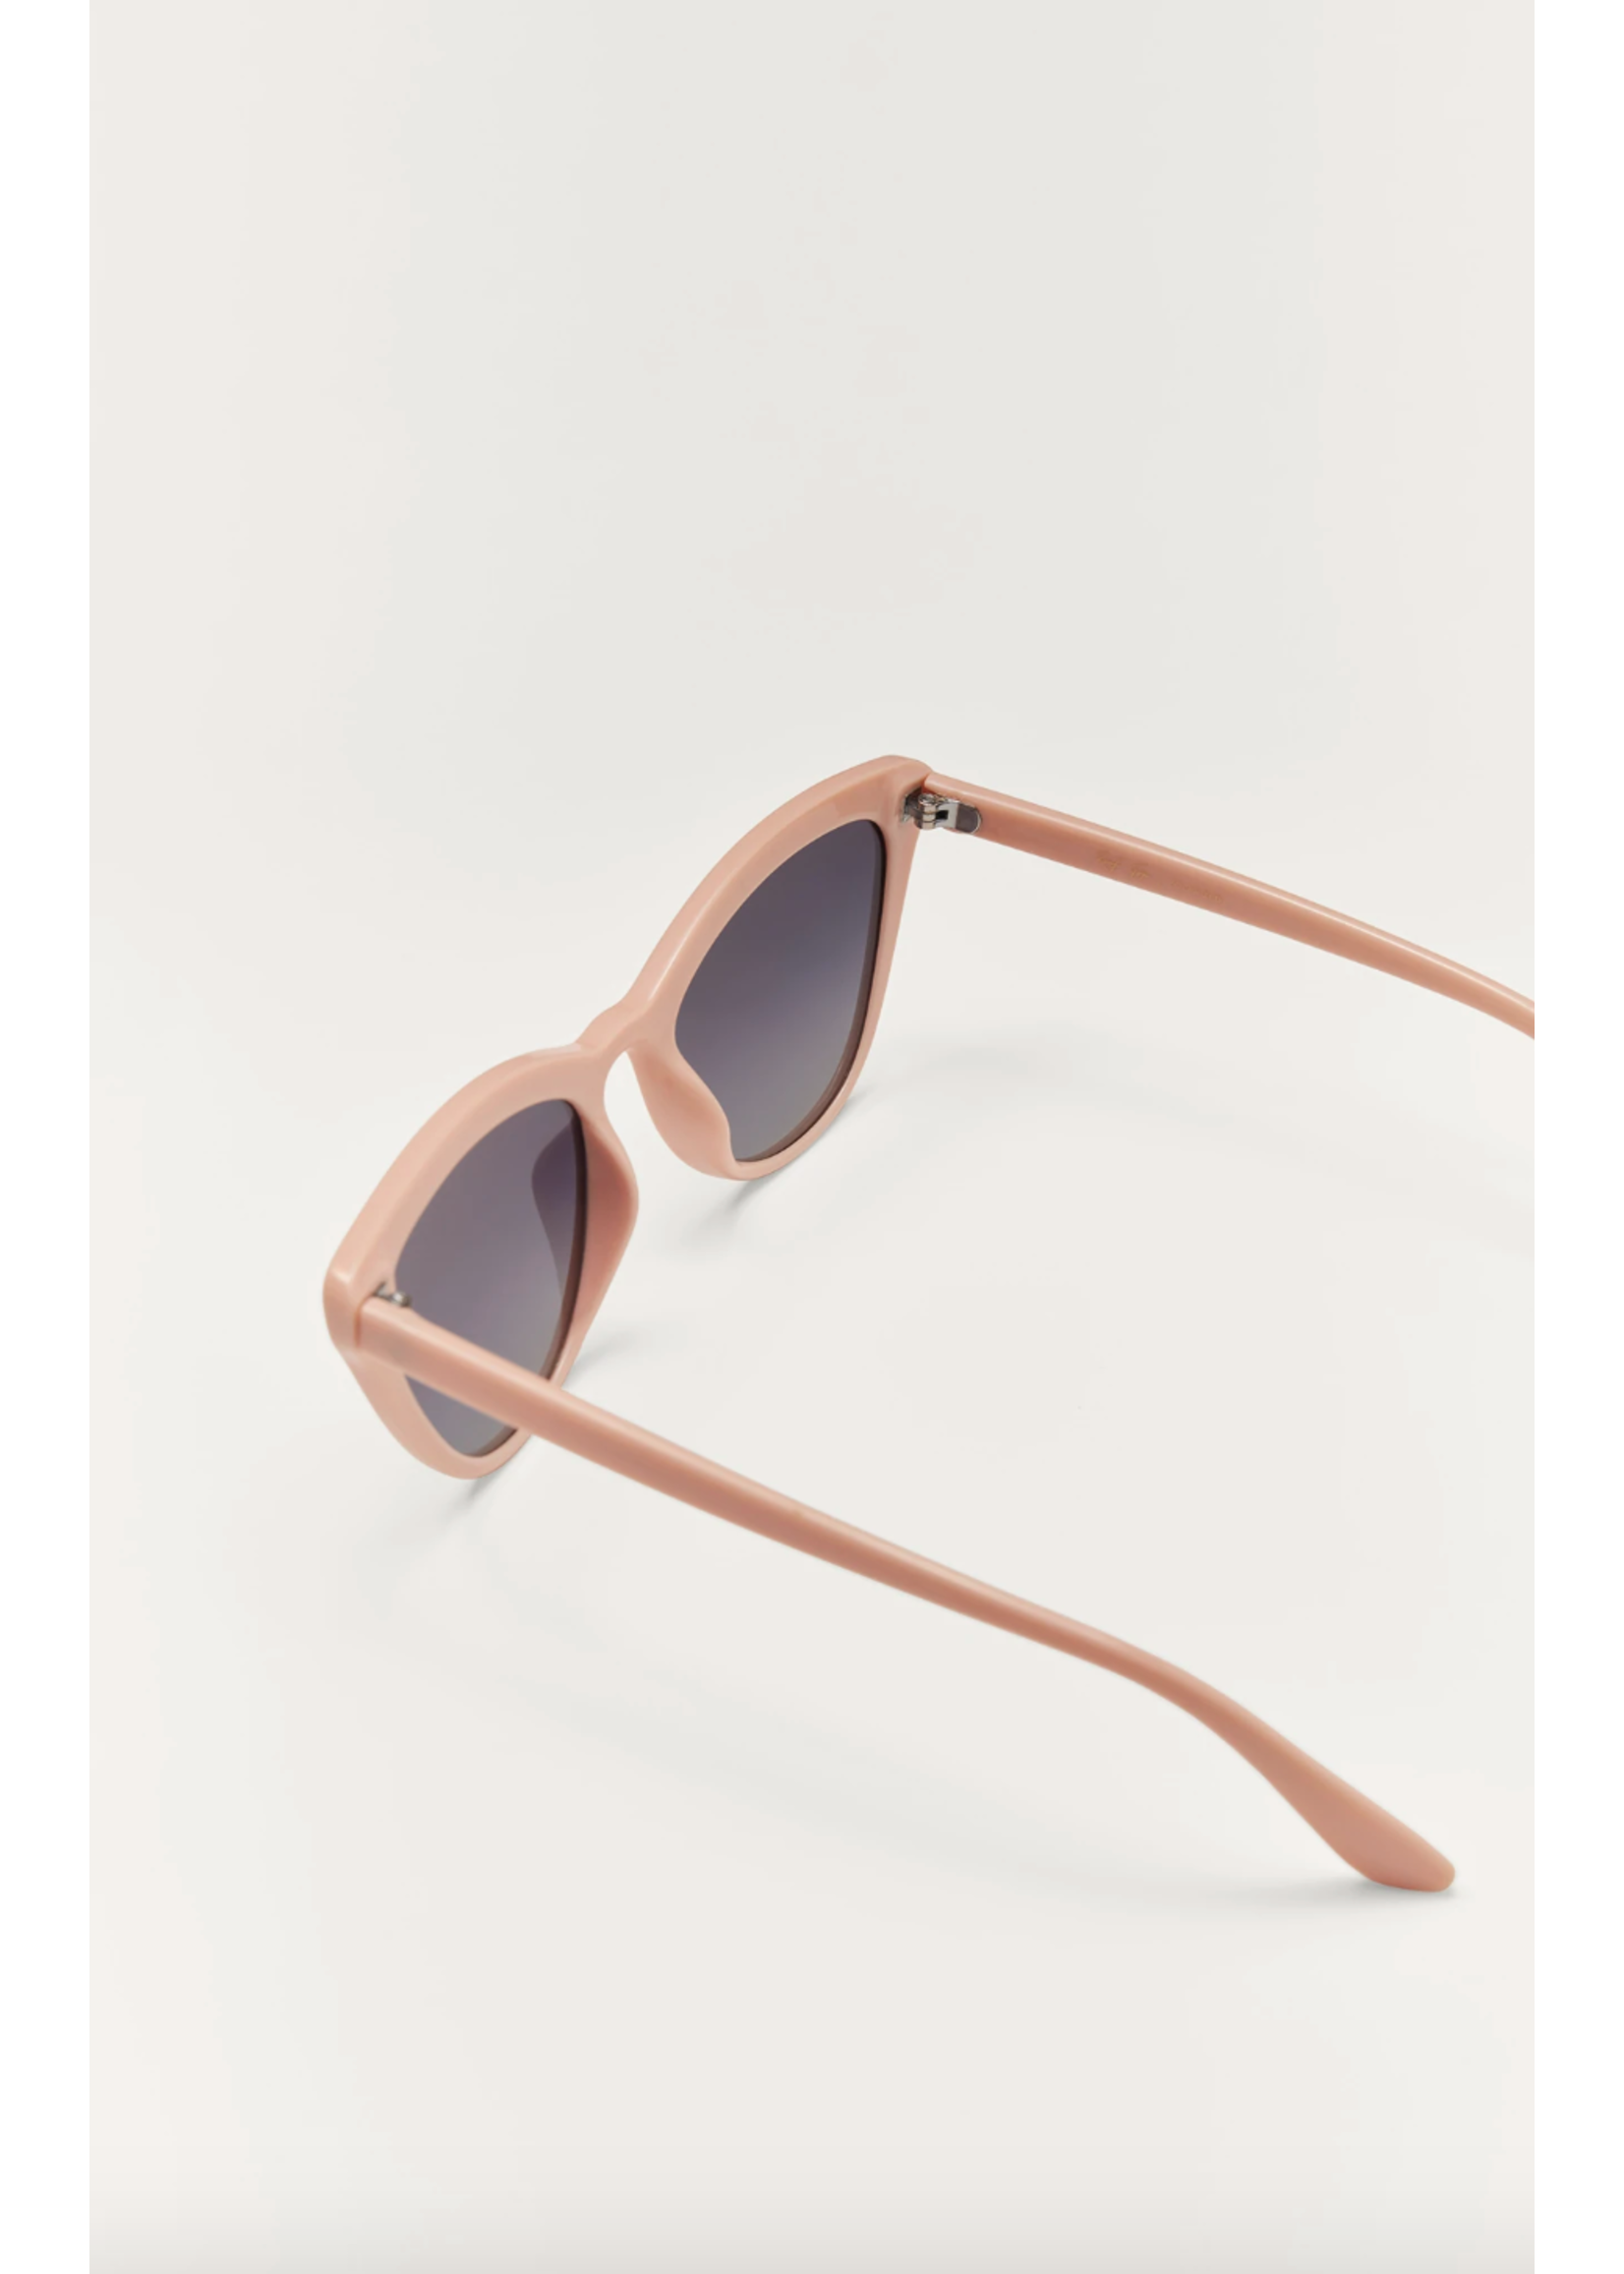 Z-Supply Rooftop Sunglasses